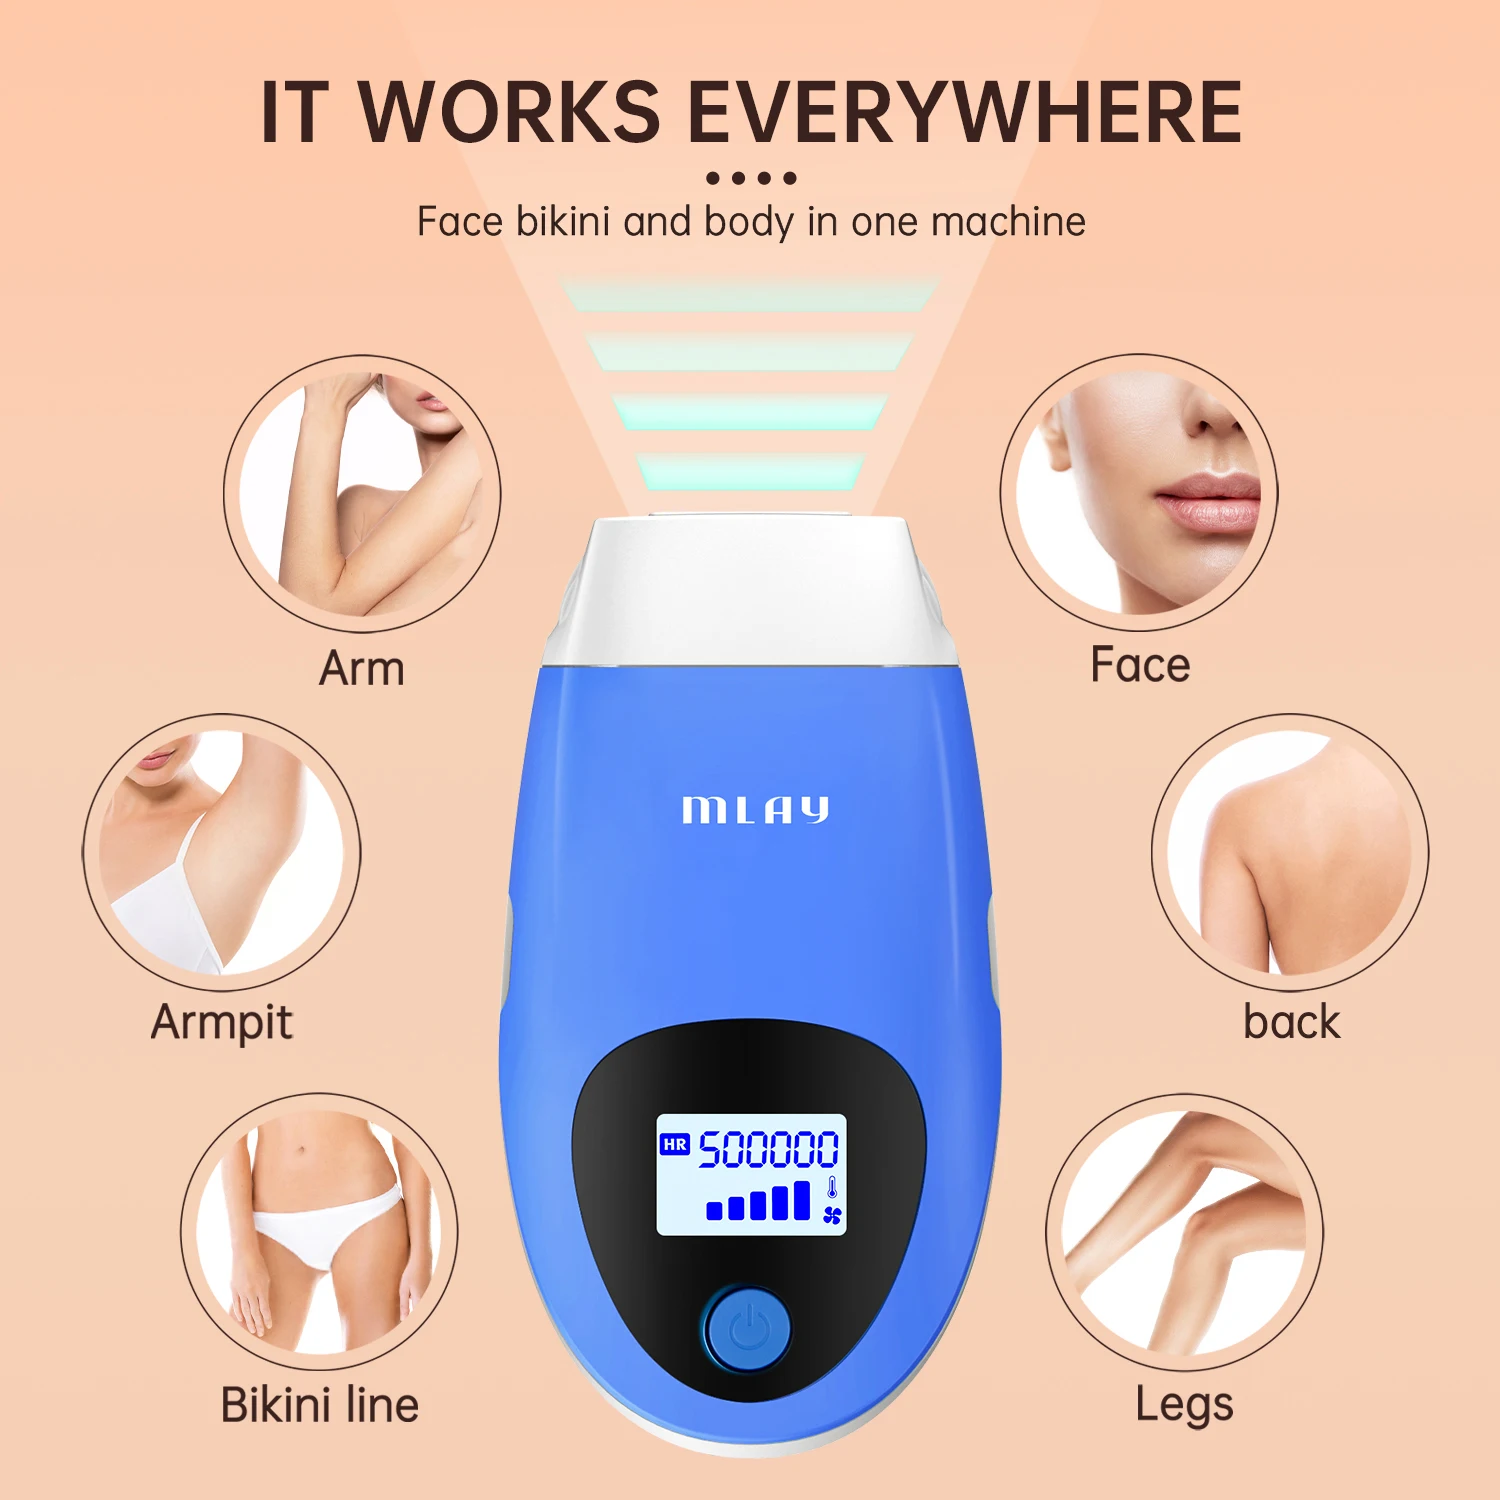 Mlay T3 500000 Shots Home Use Portable IPL Laser Hair Removal Skin Rejuvenation Acne Treatment for Face Ems Type